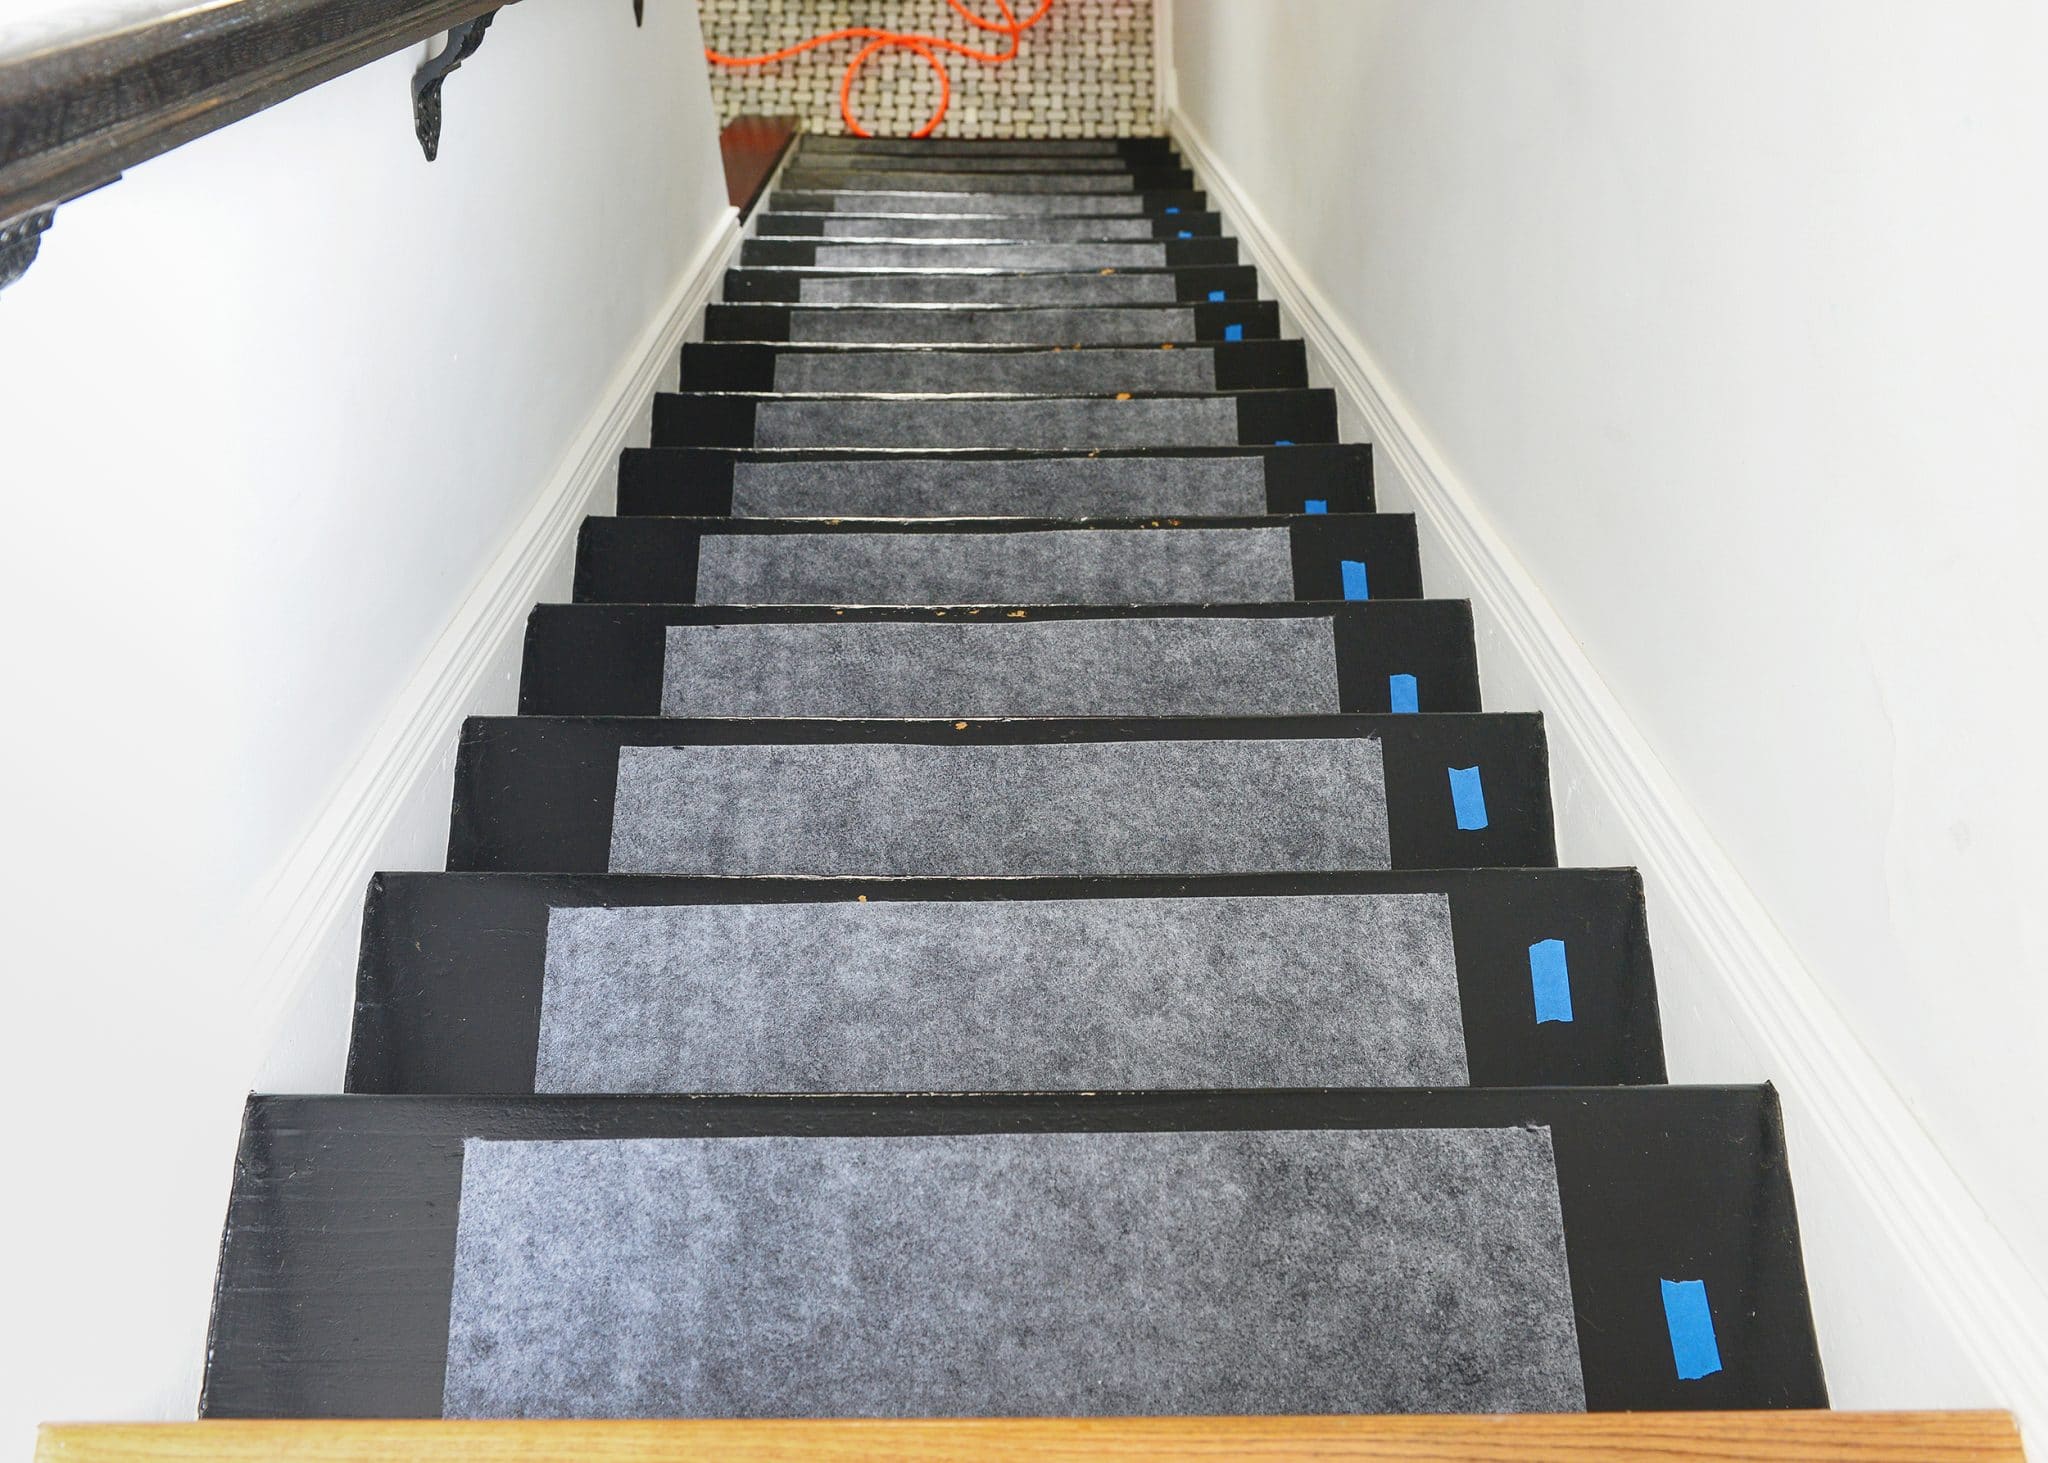 Rug pads in place before the installation of a stair runner | How to Install a Stair Runner in 10 Steps via Yellow Brick Home